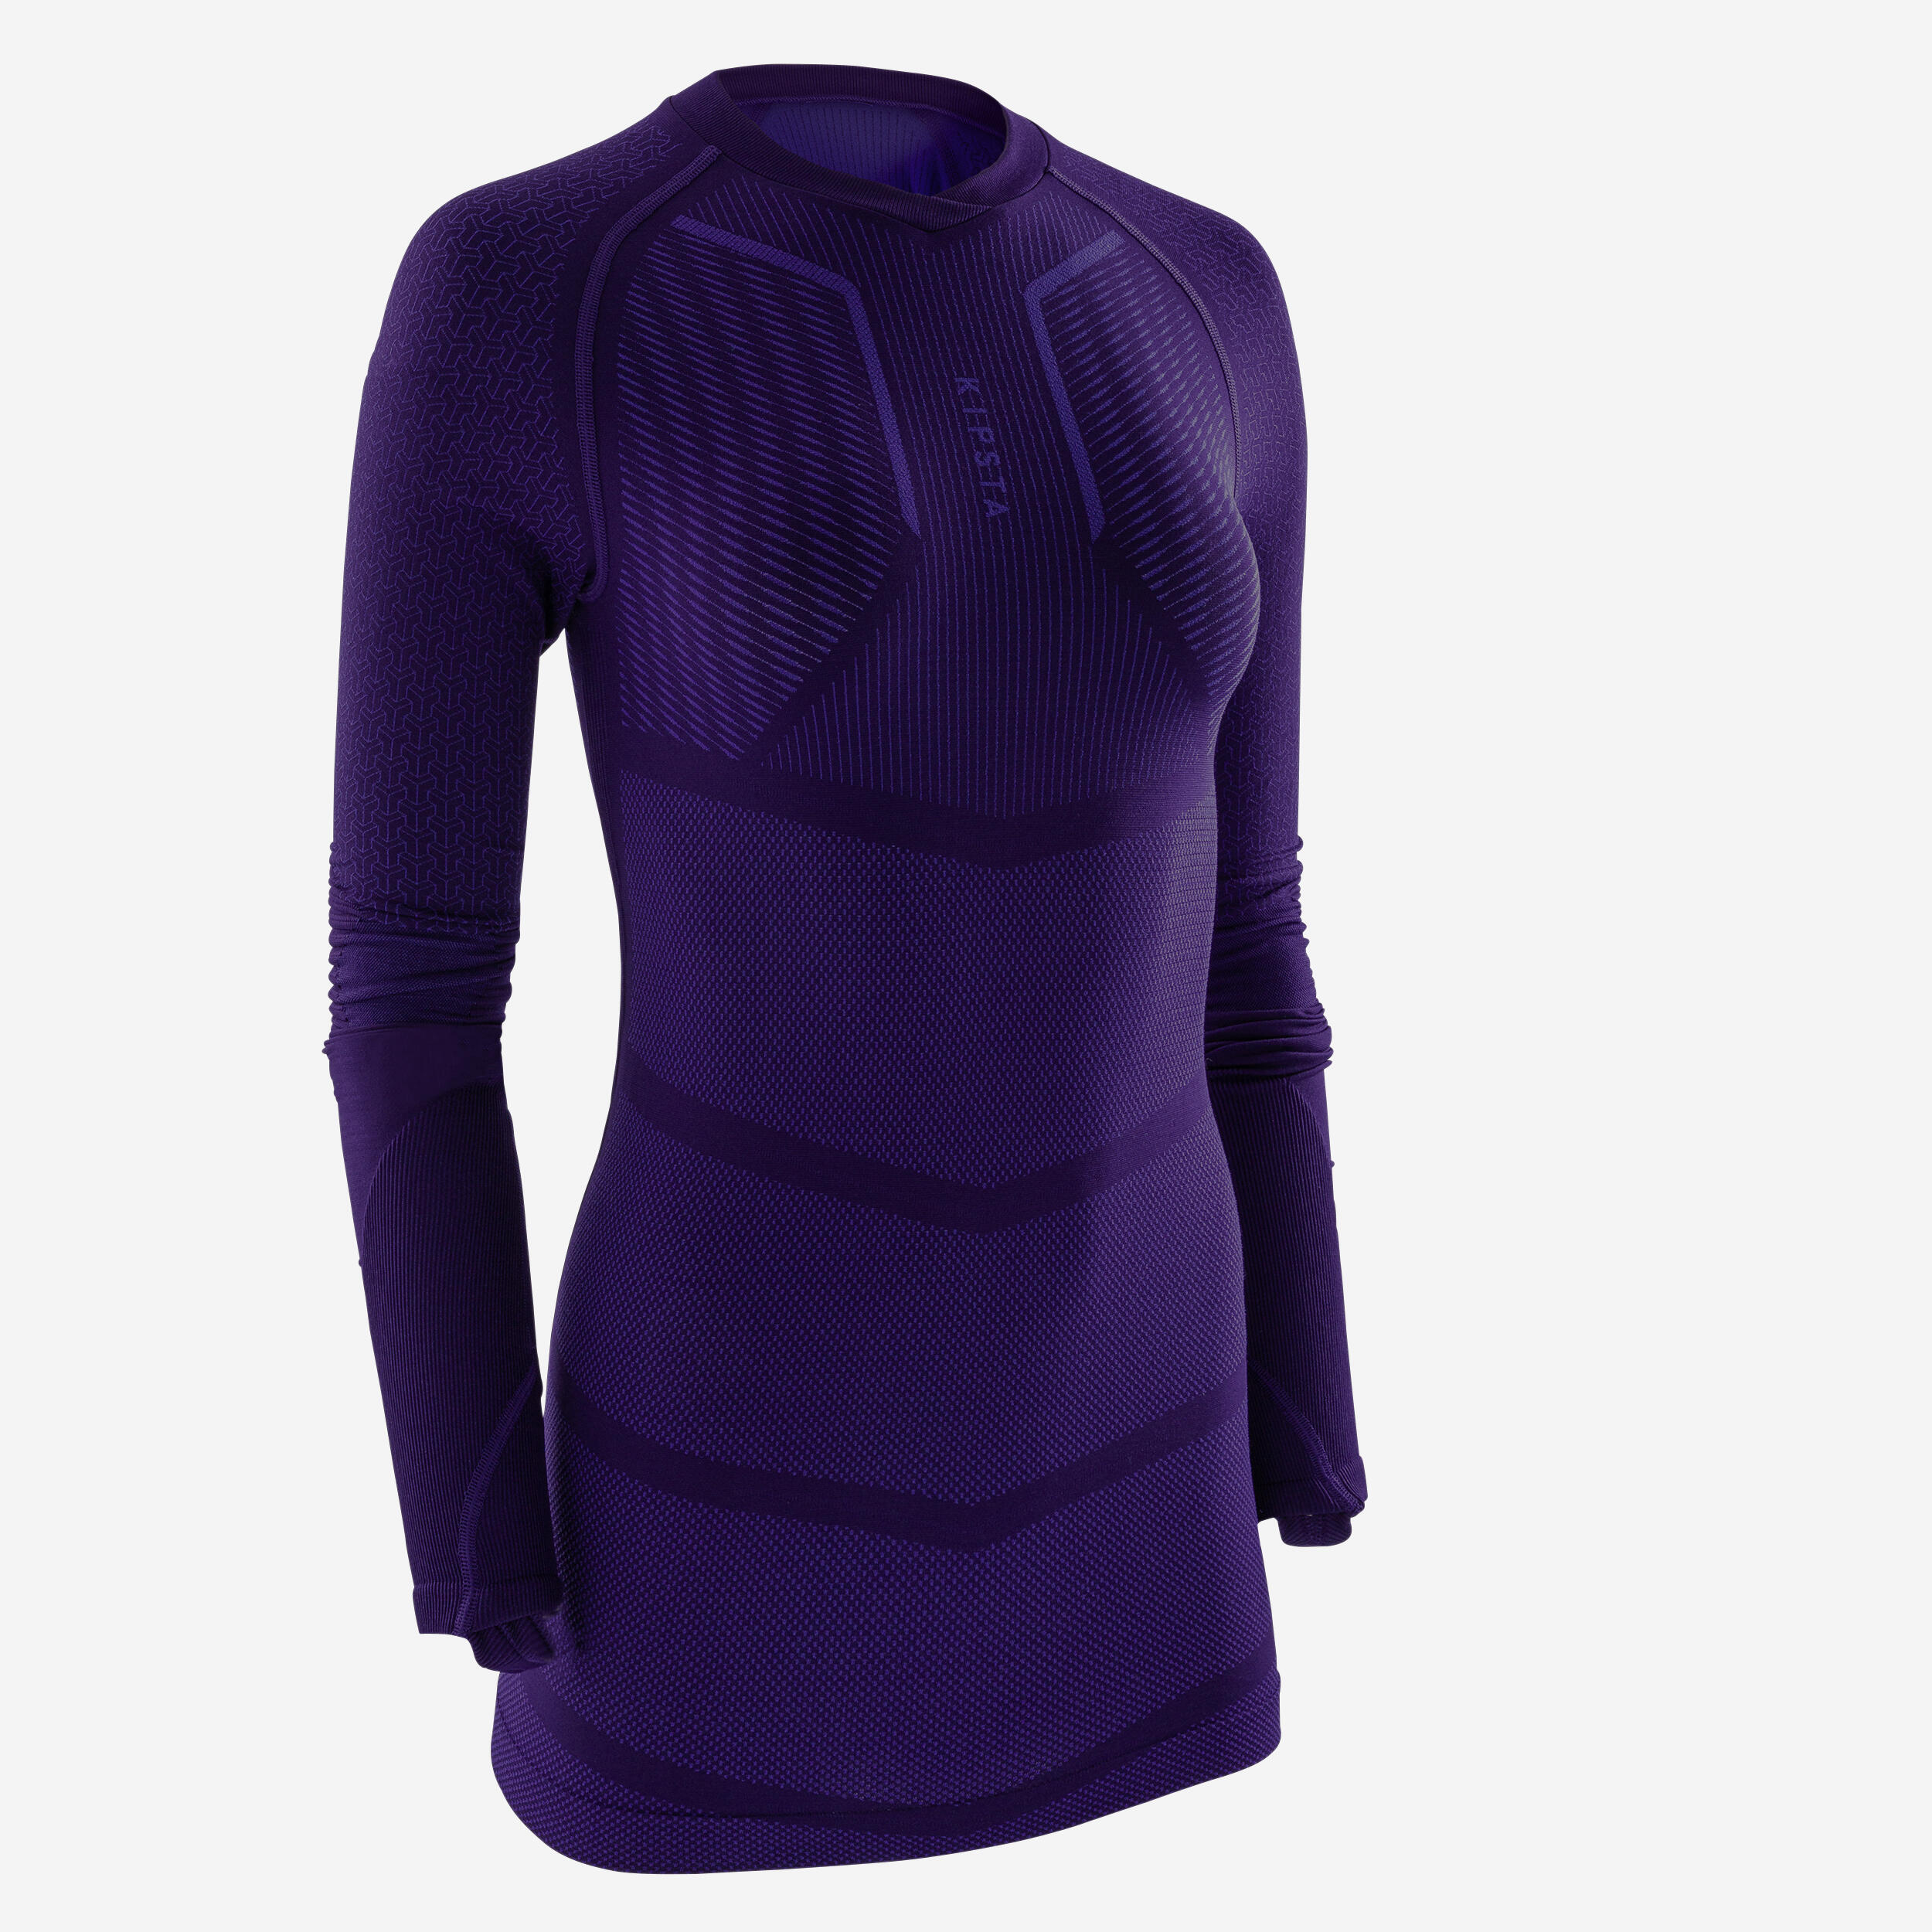 Adult Long-Sleeved Thermal Base Layer Top Keepdry 500 - Purple 2/15